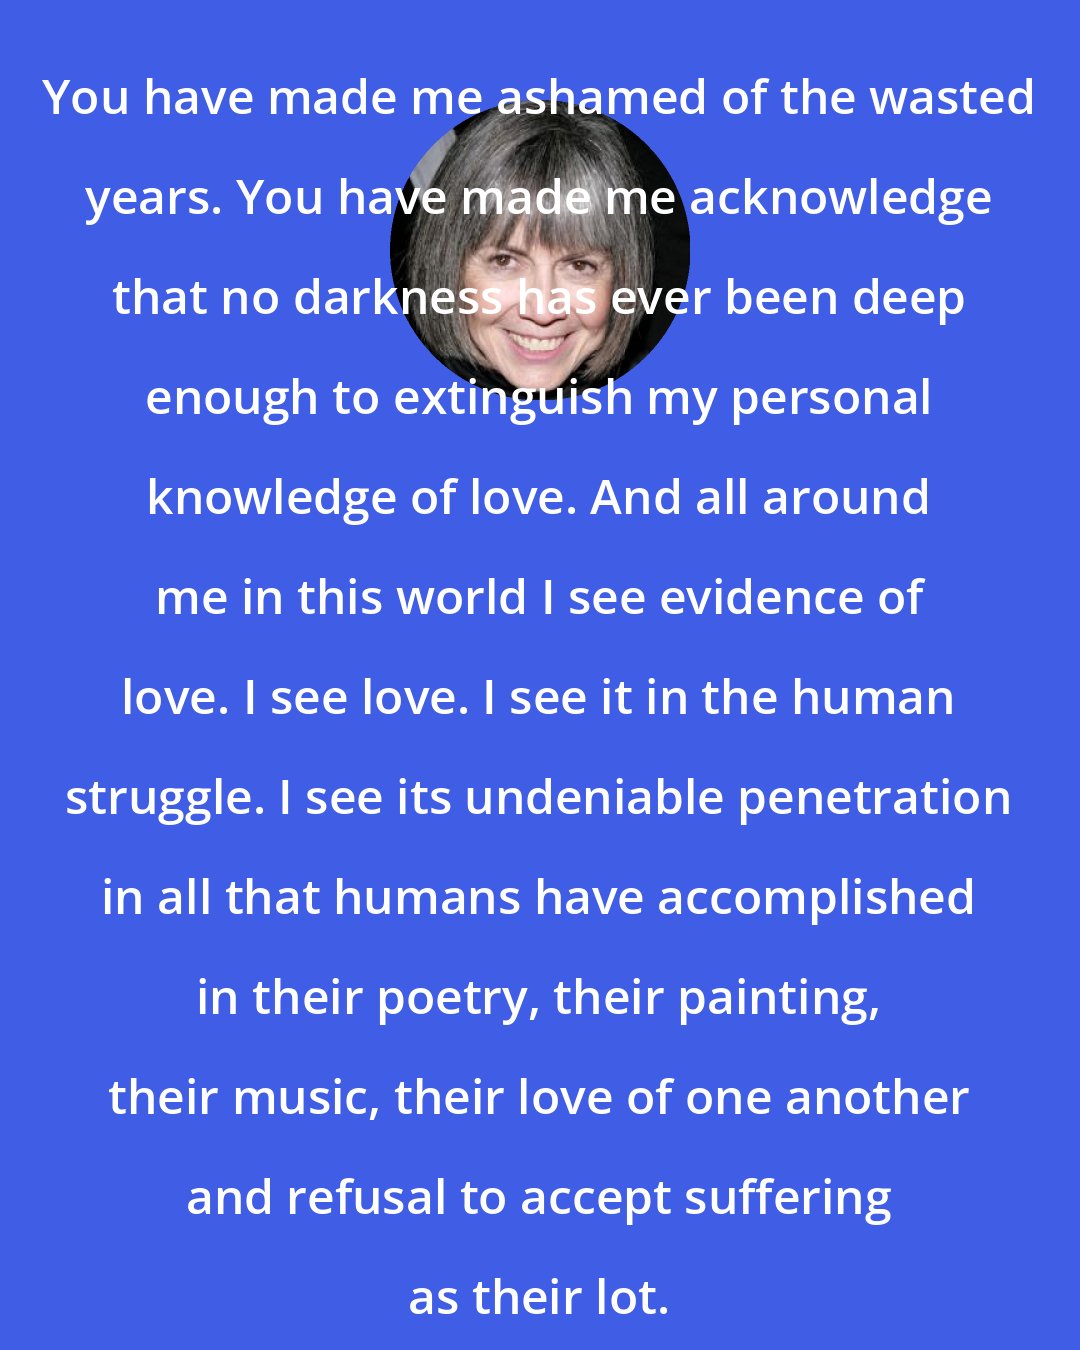 Anne Rice: You have made me ashamed of the wasted years. You have made me acknowledge that no darkness has ever been deep enough to extinguish my personal knowledge of love. And all around me in this world I see evidence of love. I see love. I see it in the human struggle. I see its undeniable penetration in all that humans have accomplished in their poetry, their painting, their music, their love of one another and refusal to accept suffering as their lot.